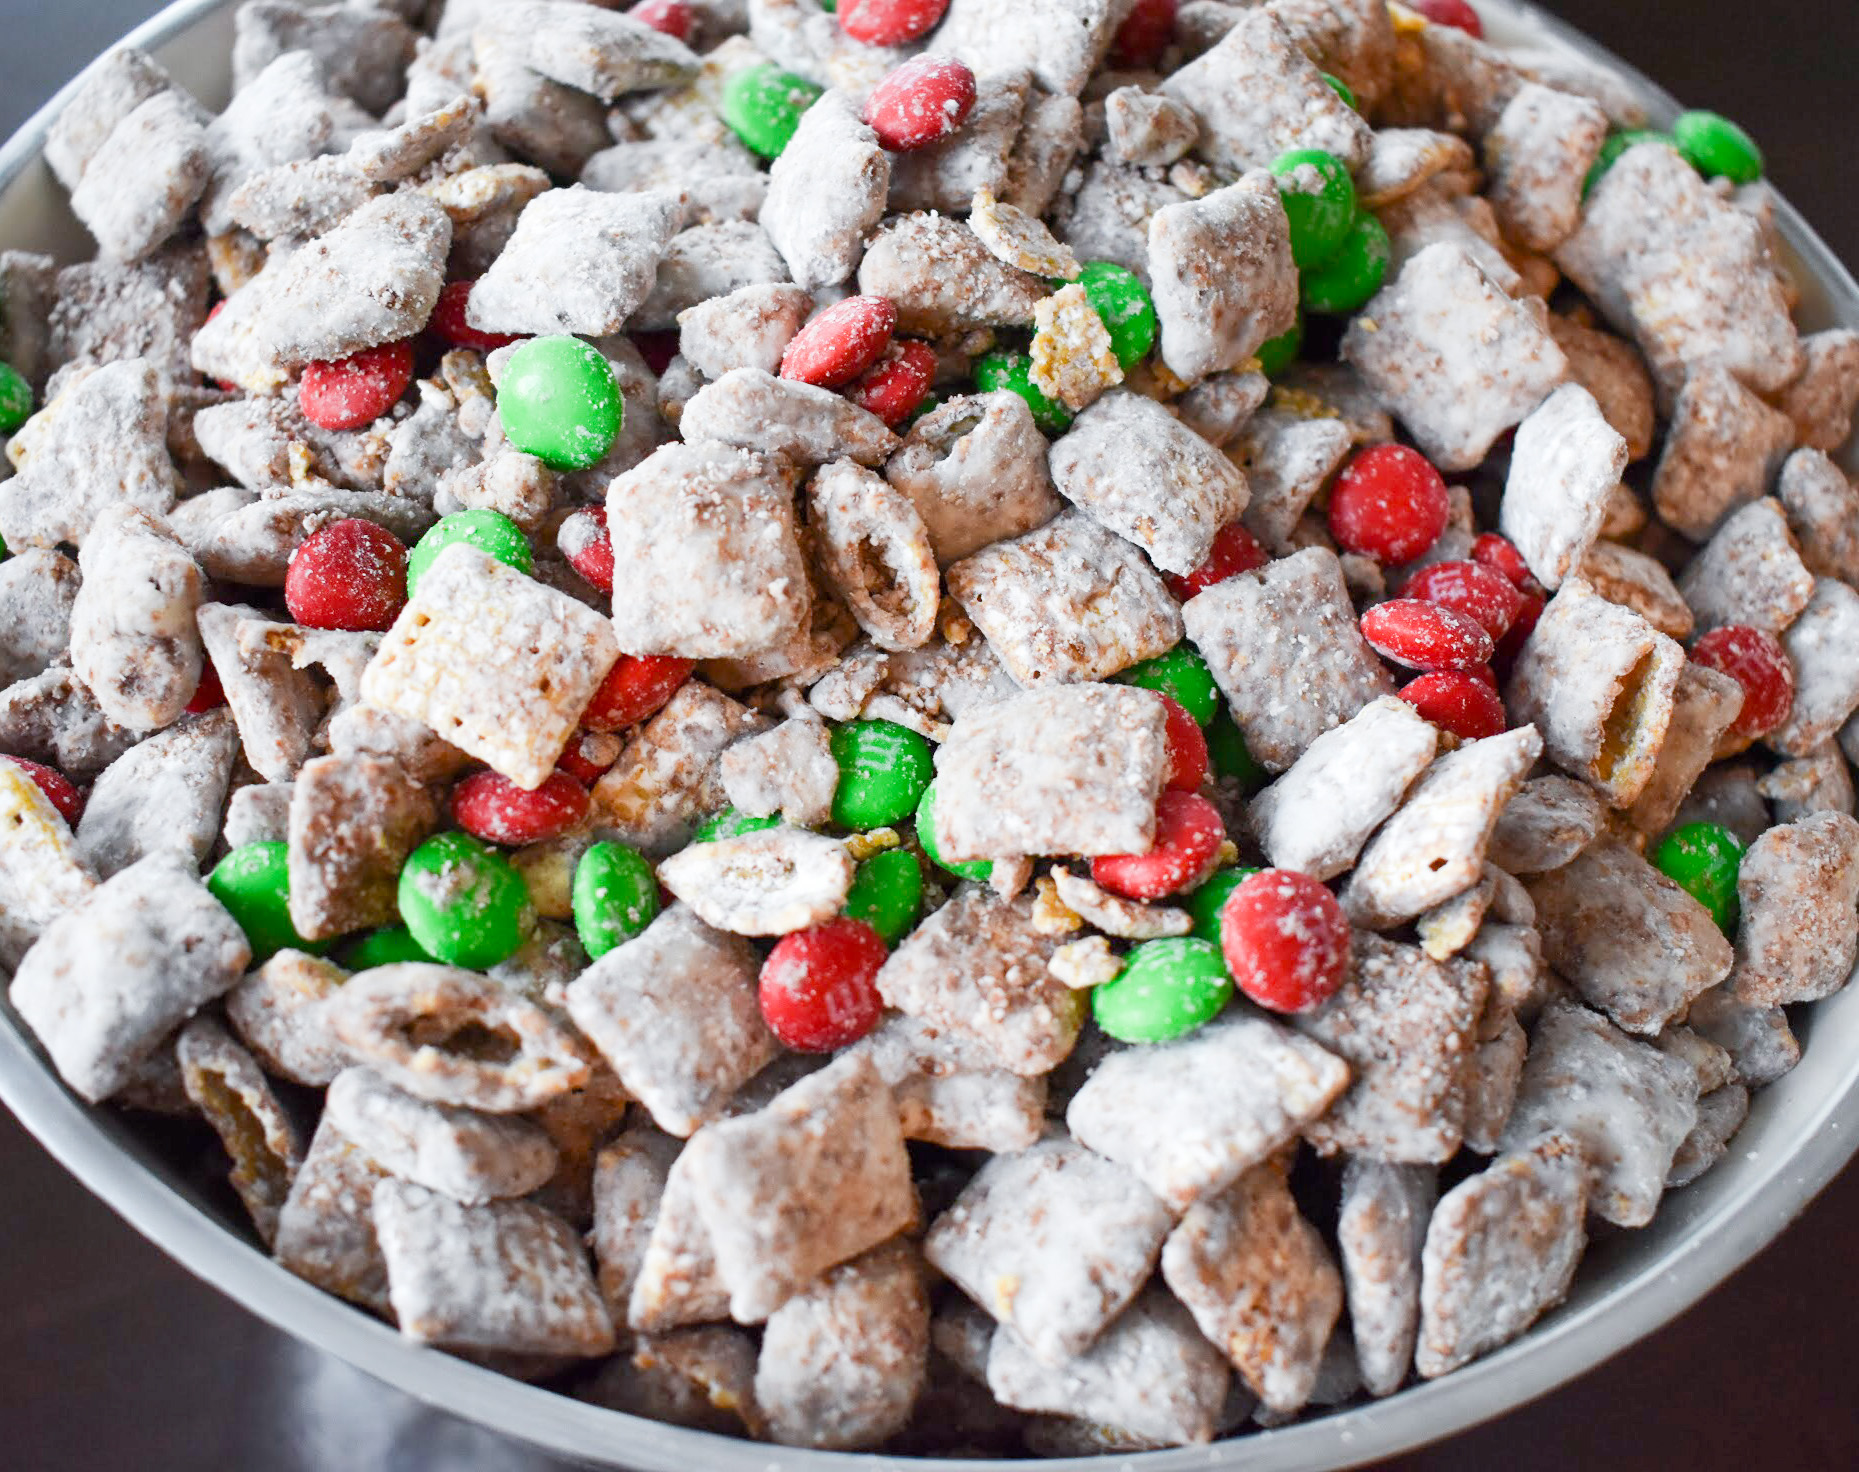 Your family will love this kid-friendly Christmas dessert recipe for Reindeer Treats! It doesn't matter whether you call it Reindeer Treats, Reindeer Chow, Christmas Muddy Buddies, or even Puppy Chow... everyone loves a big bowl of this stuff! This holiday version is even more festive with the addition of red and green candies.